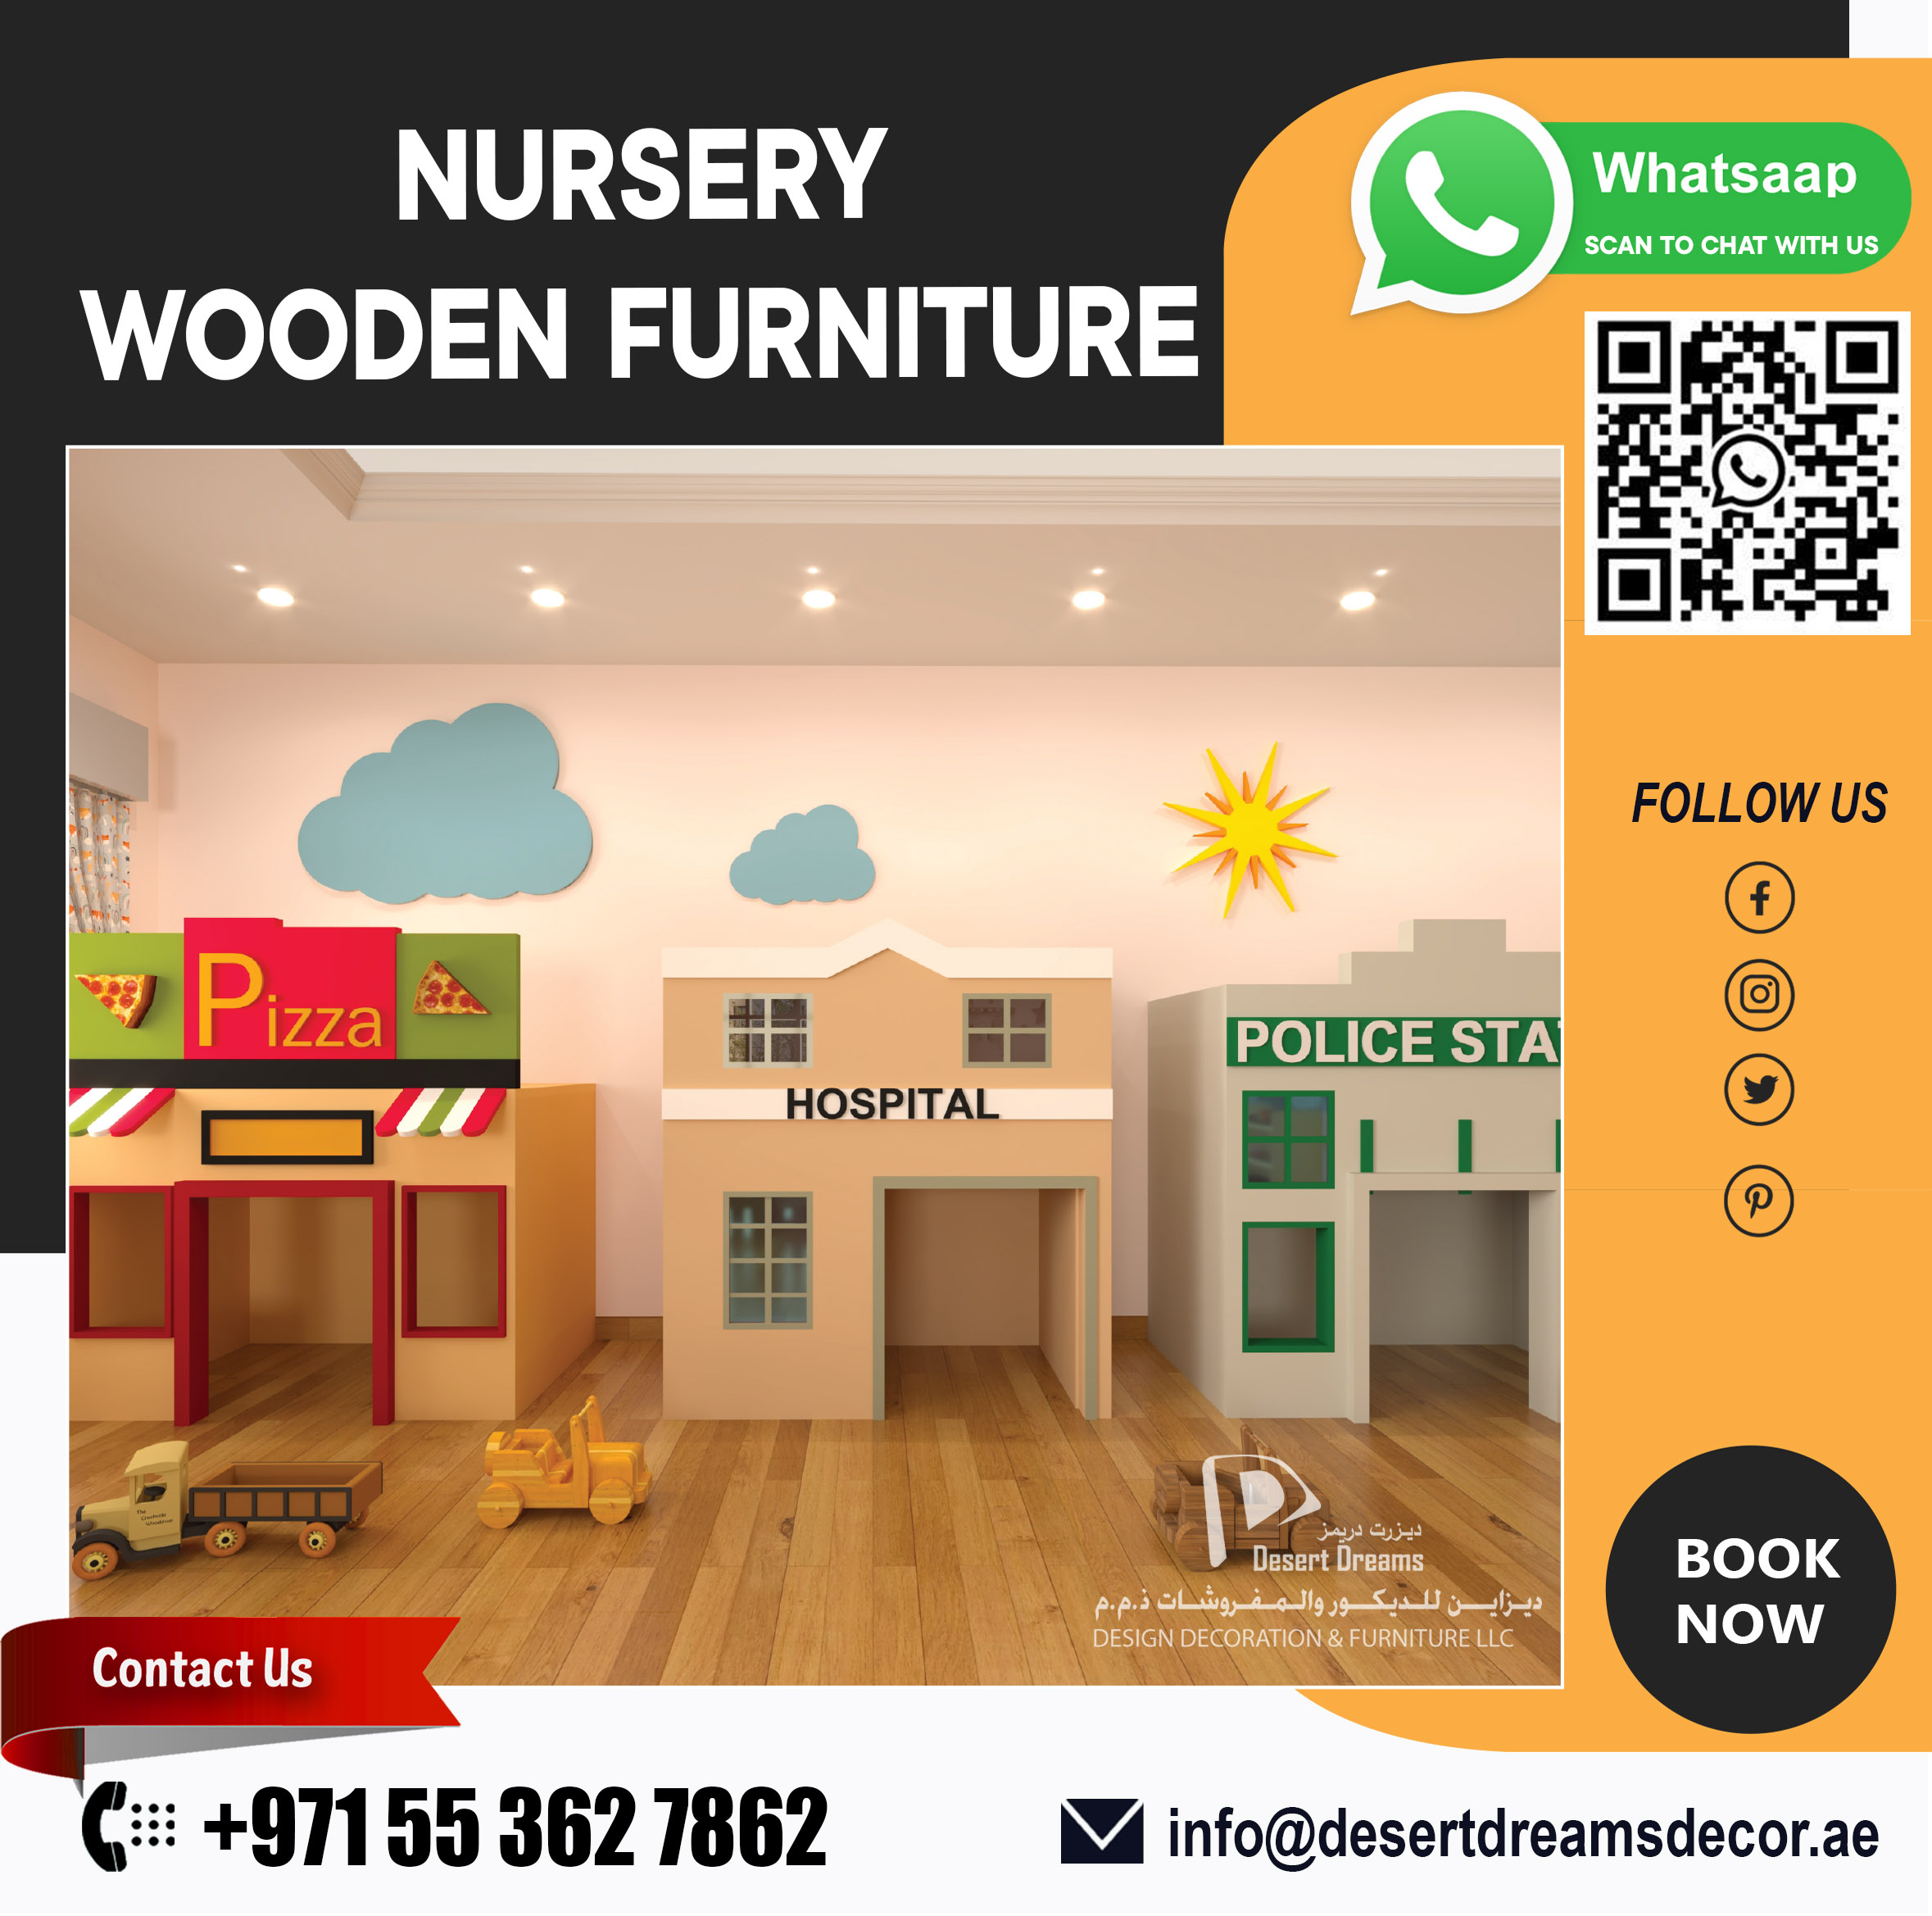 Nursery Design and Decor in Uae | Kids Wooden Items and Furniture